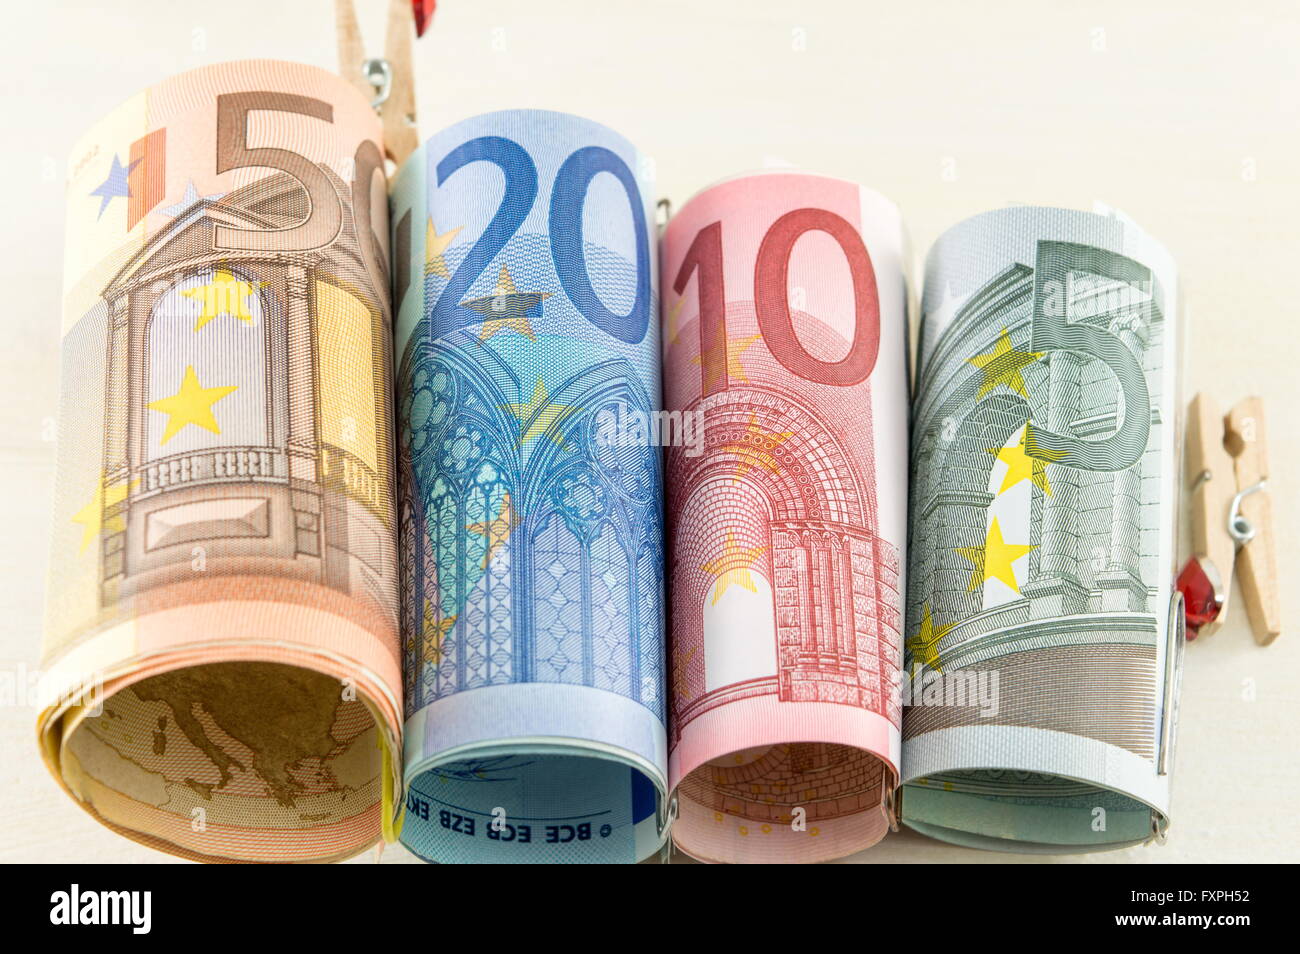 Rolled up euro bills Stock Photo